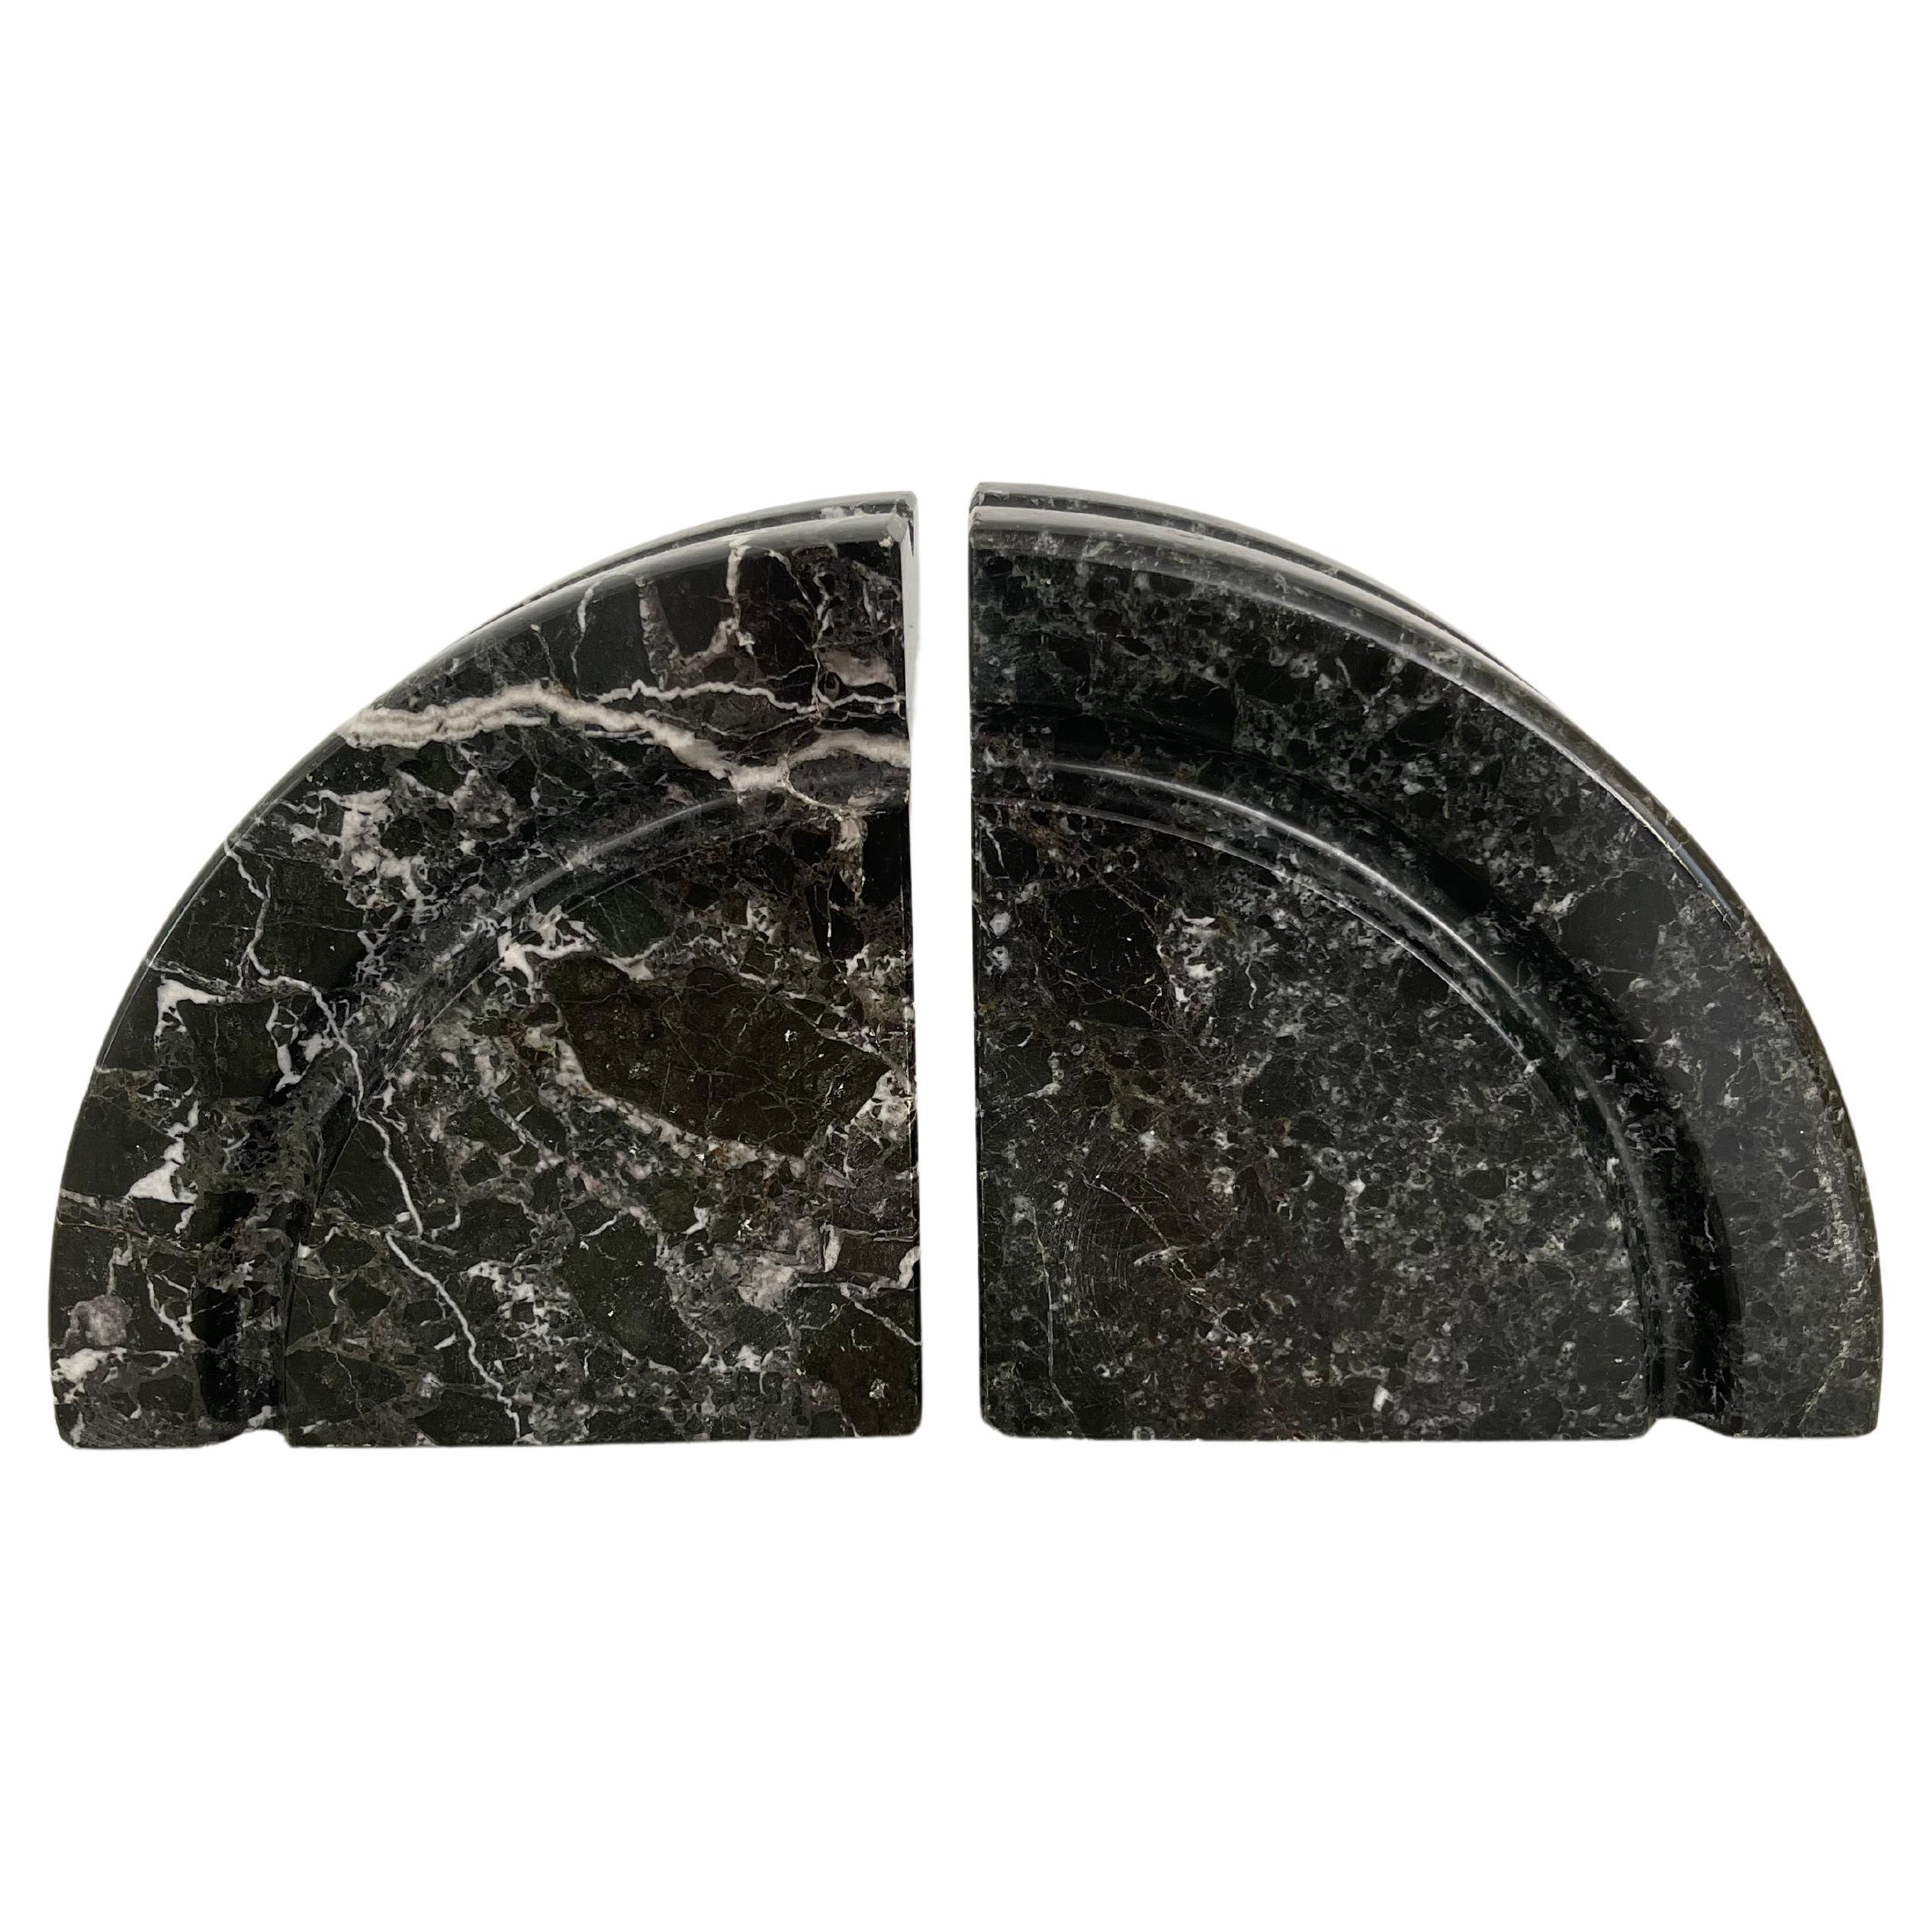 These 1970's Post Modern Italian Marble Bookends are beautifully made in black marble with strong white veins. 

Dimensions:
6